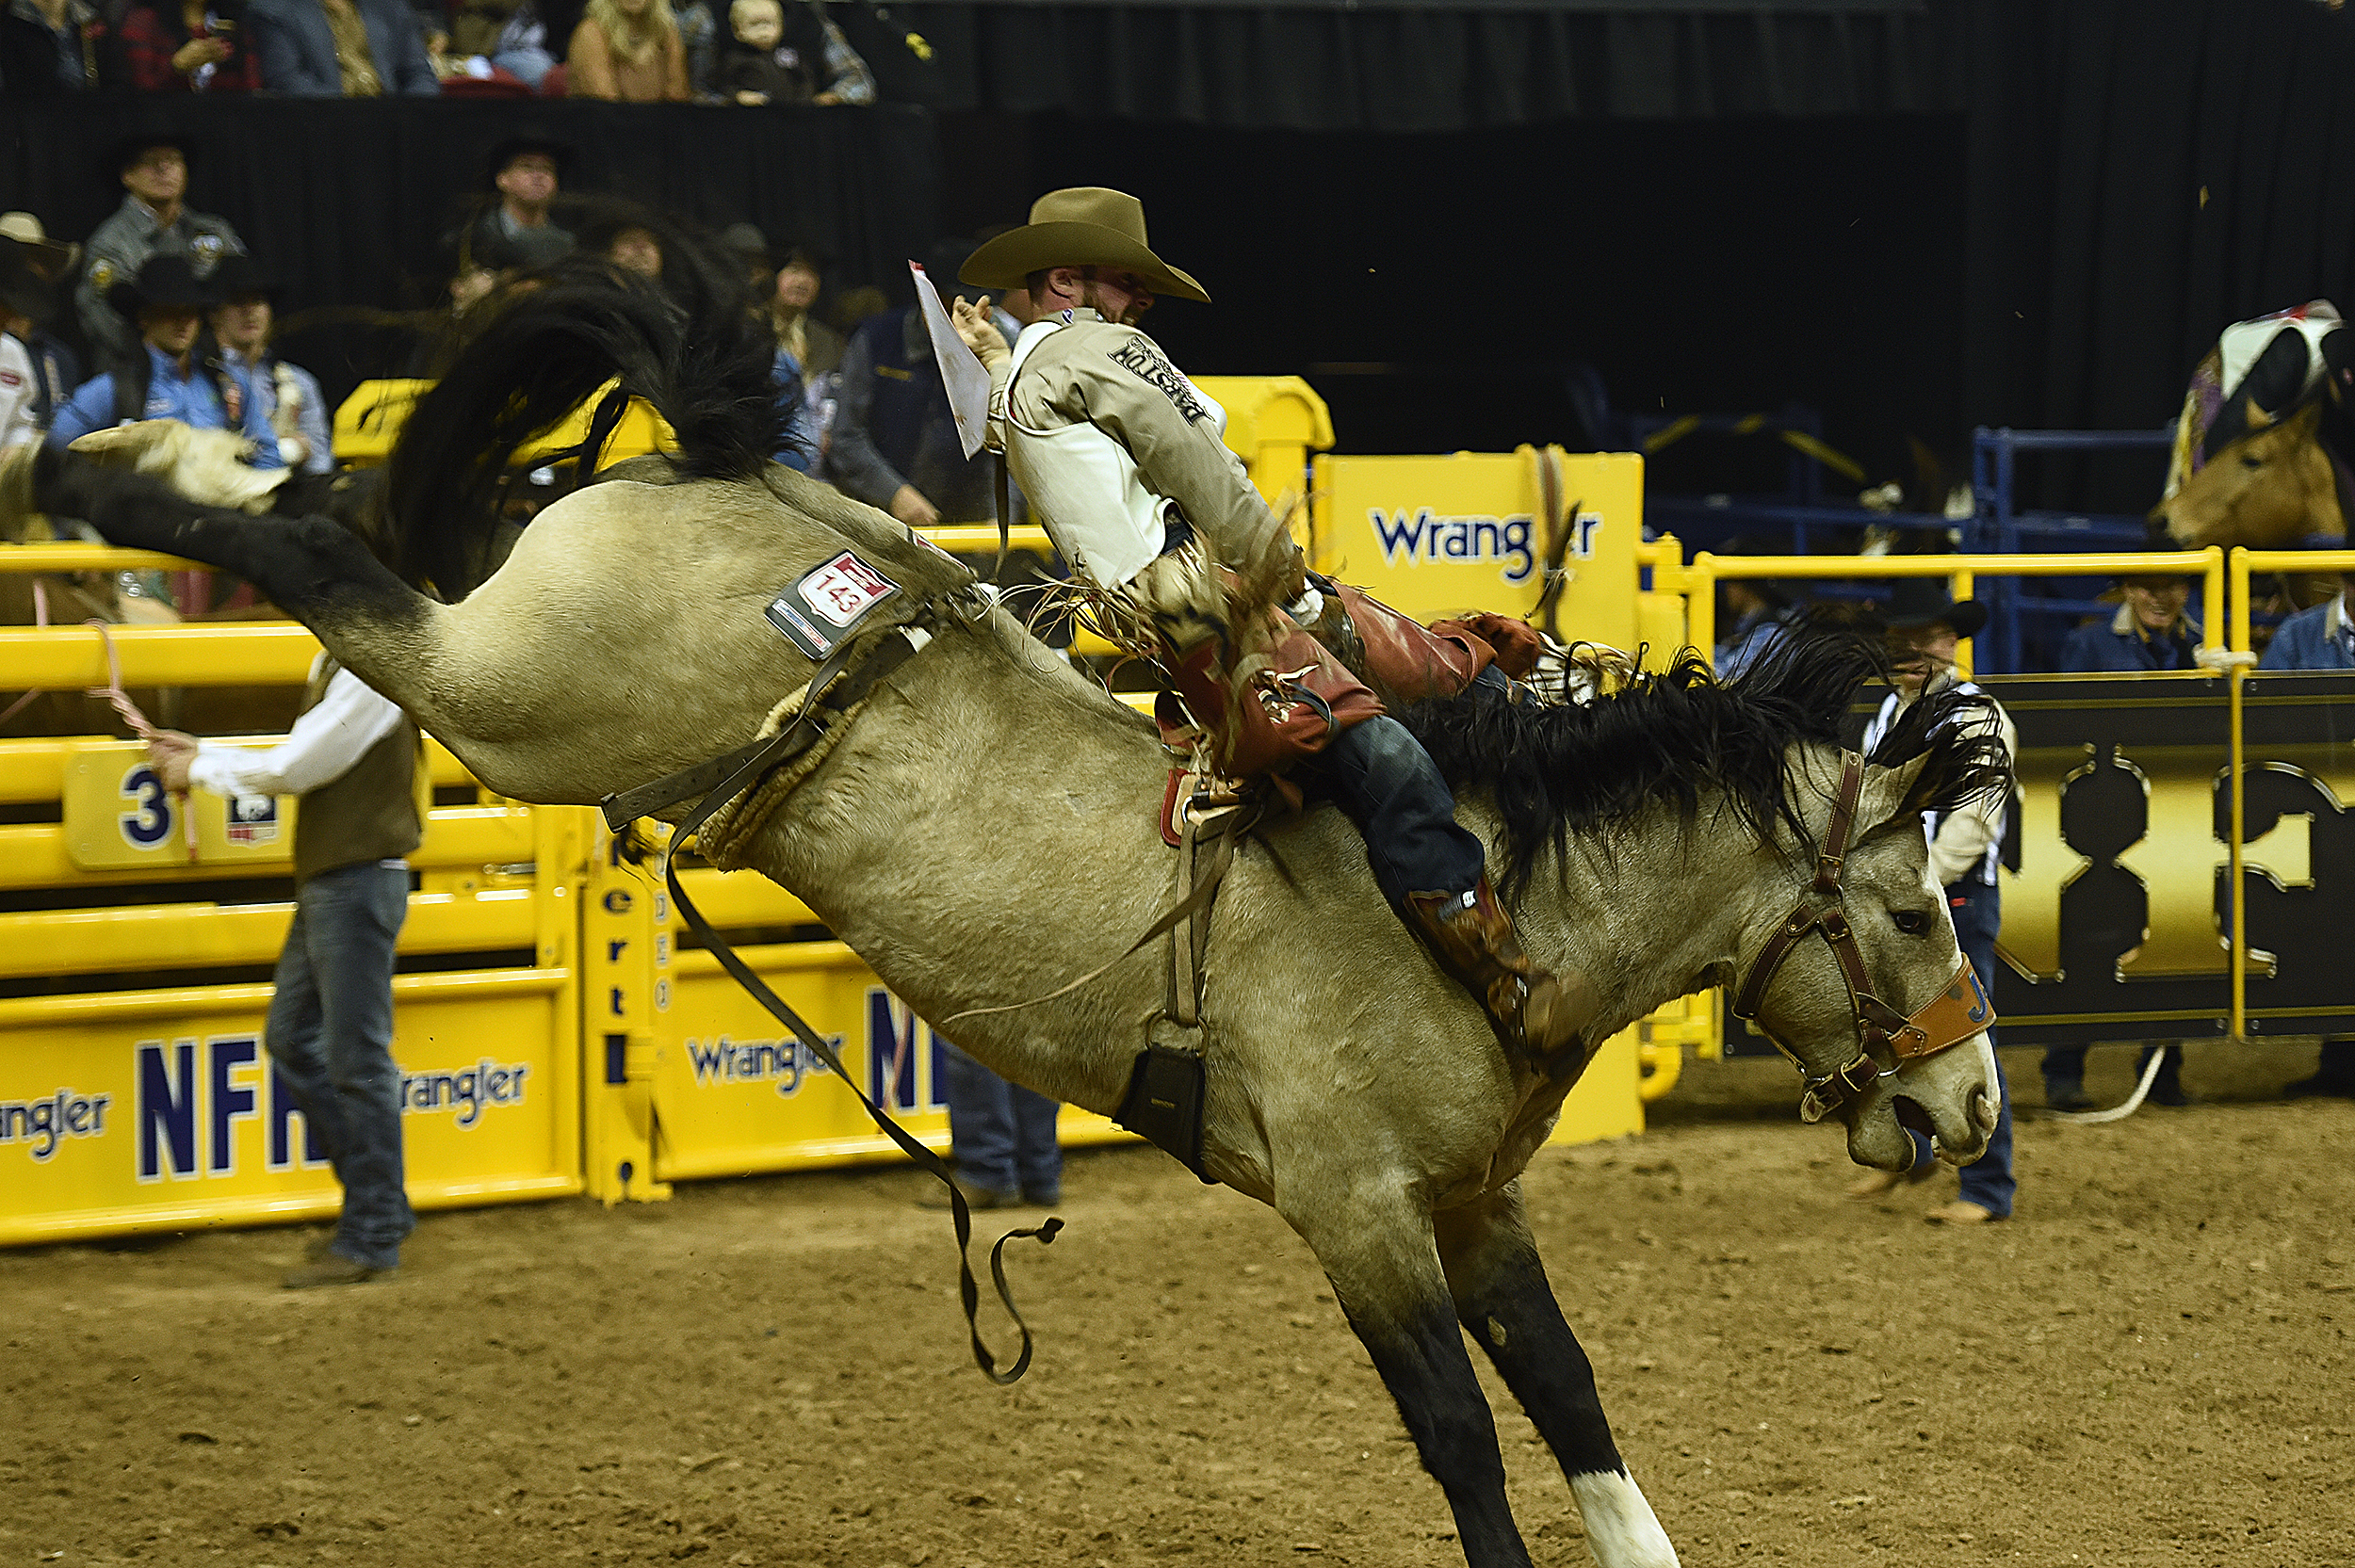 Mason Clements rides J Bar J Rodeo's Colorado Bulldog for 86.5 points Thursday night to finish second in the opening round of the National Finals Rodeo. (PHOTO BY ROBBY FREEMAN)